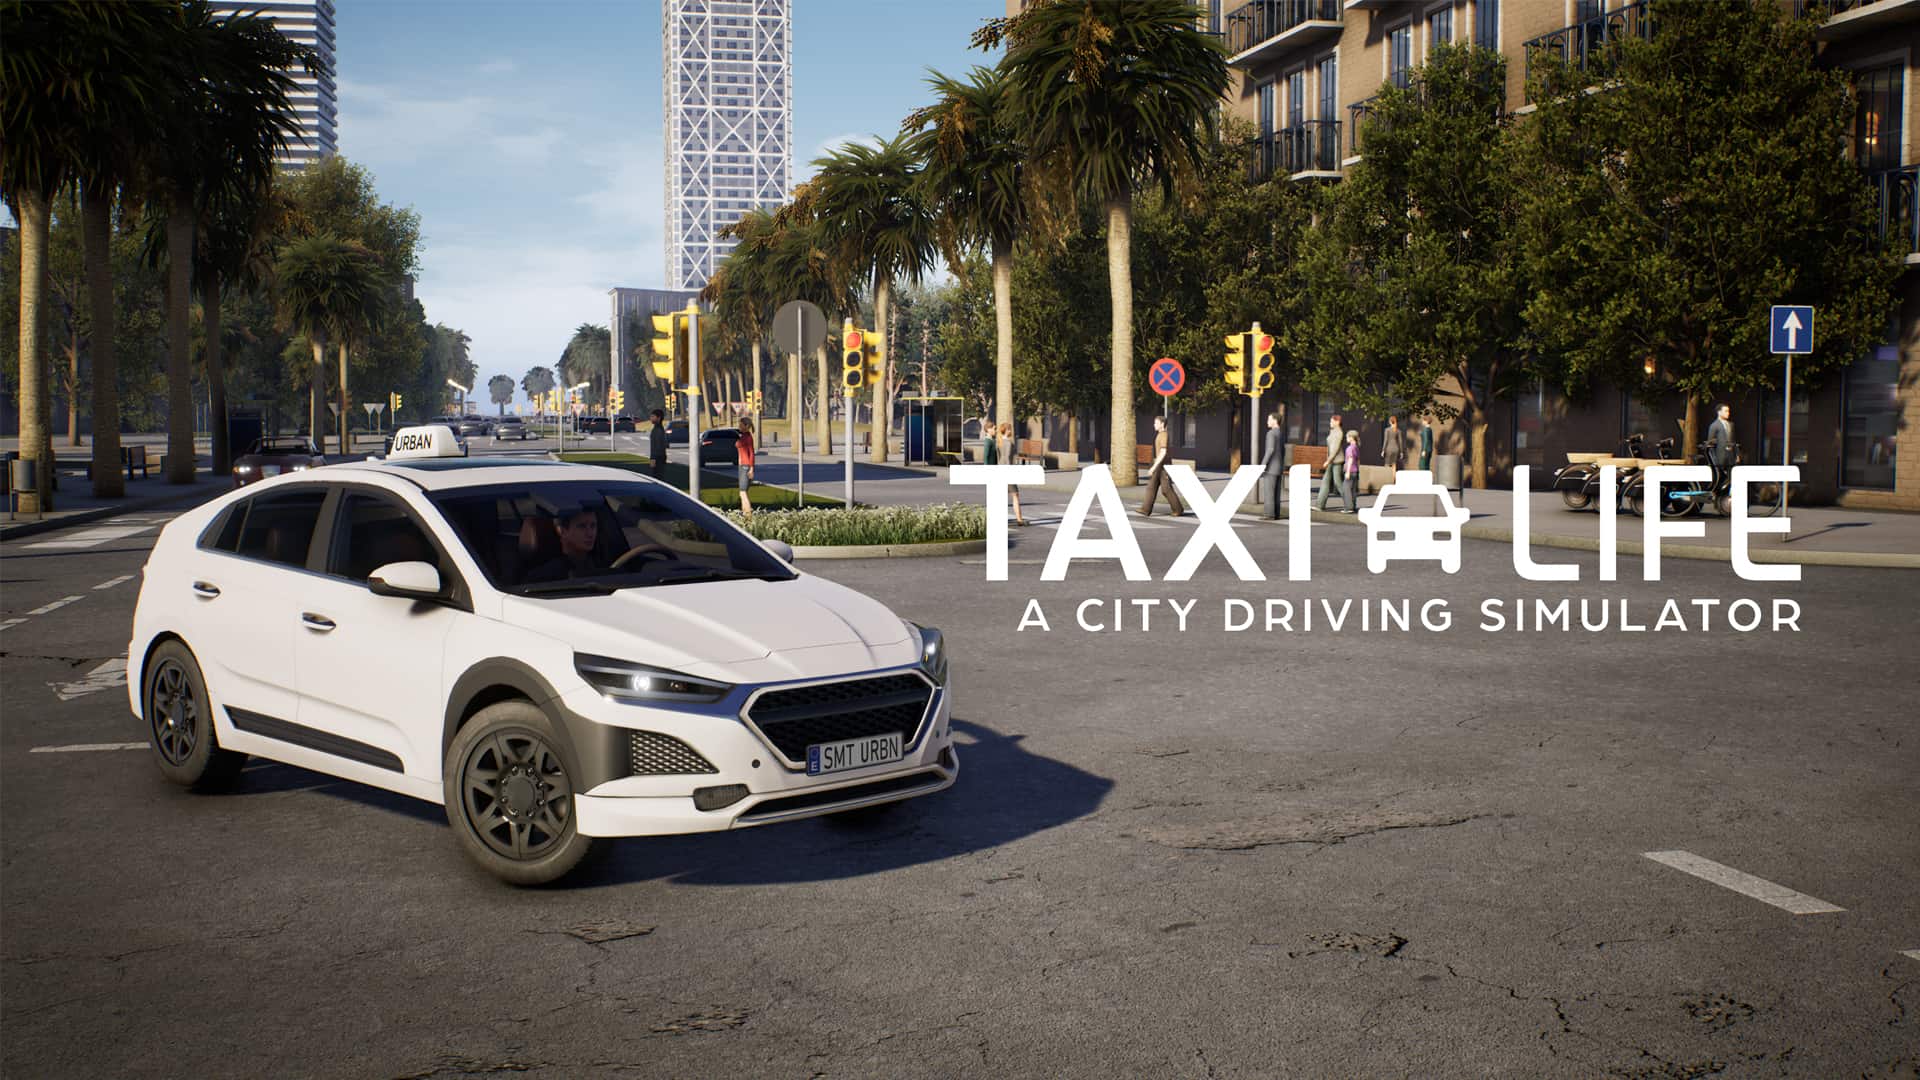 Live the cab life with Taxi Life - A City Driving Simulator in 2023